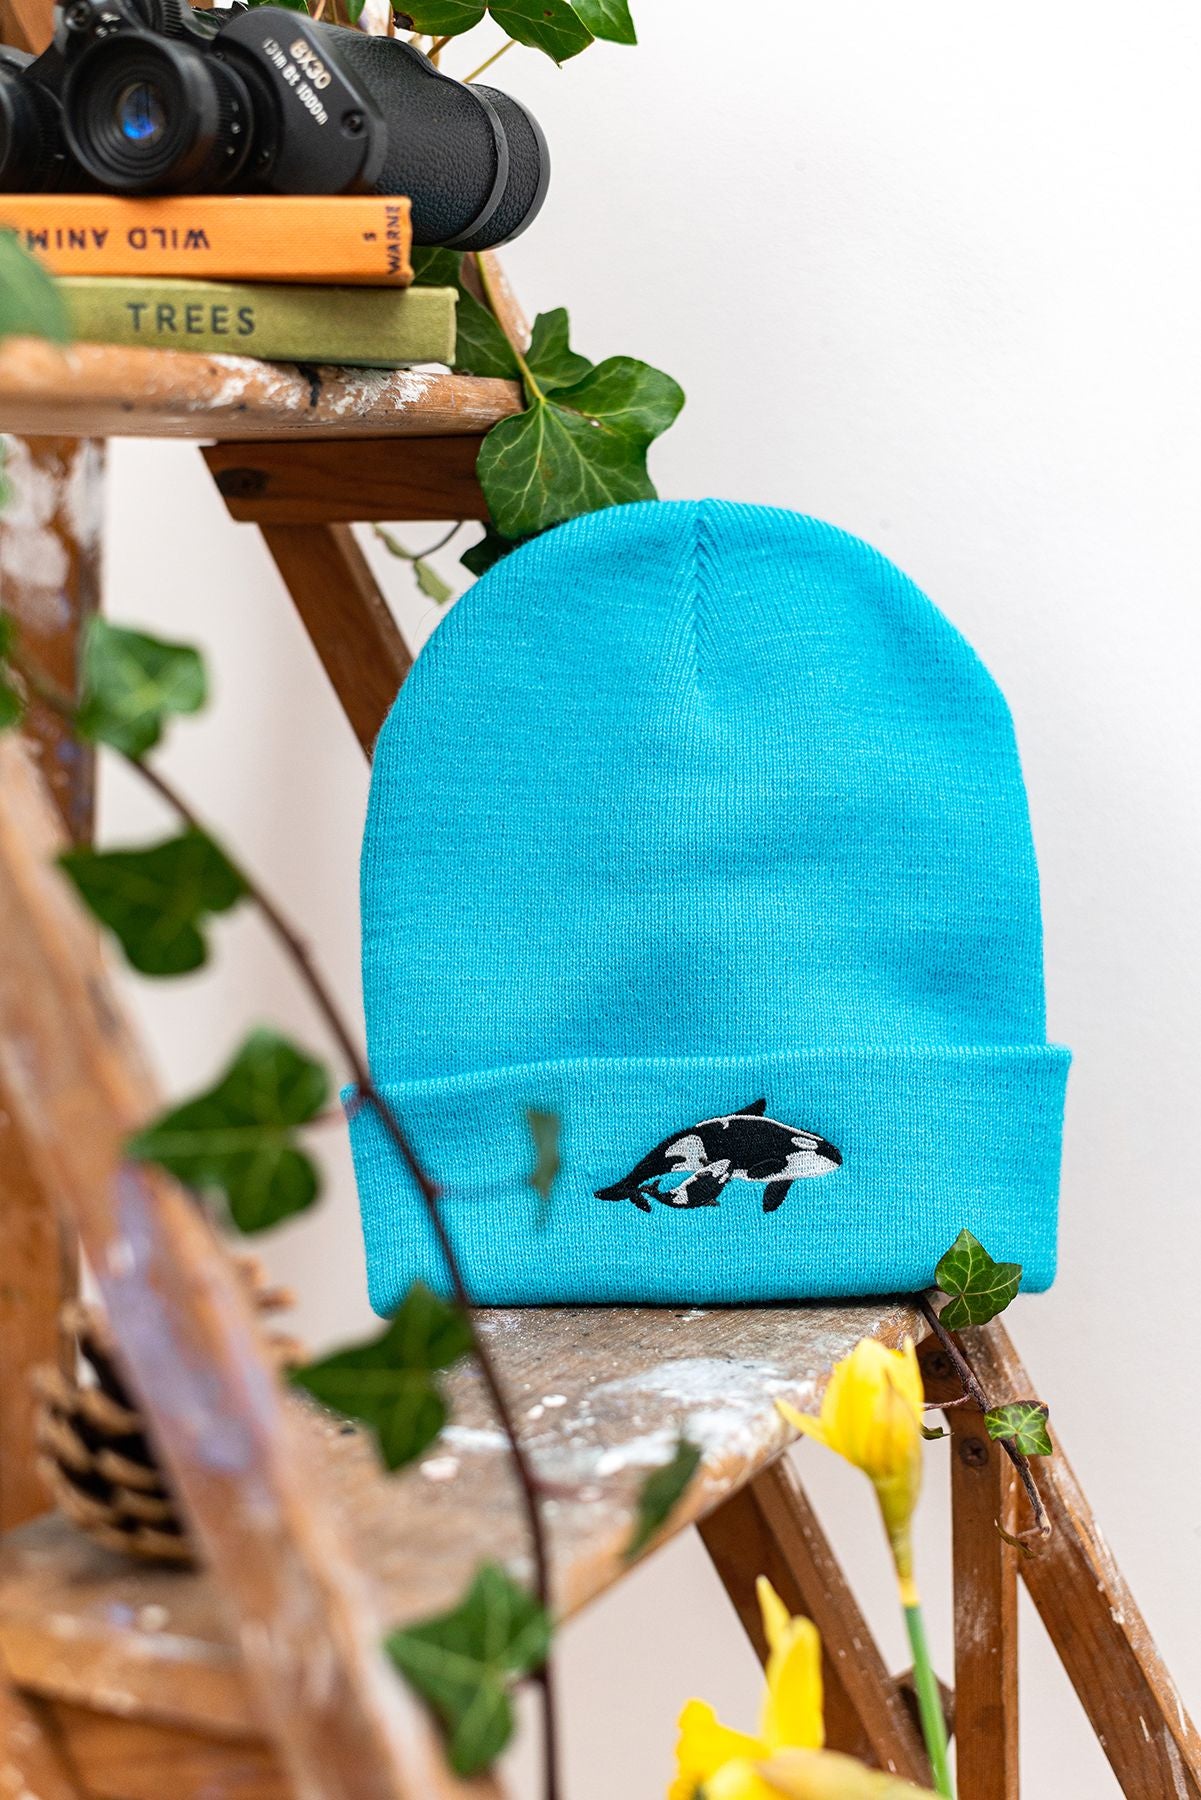 Orca Family Embroidered Beanie Hat